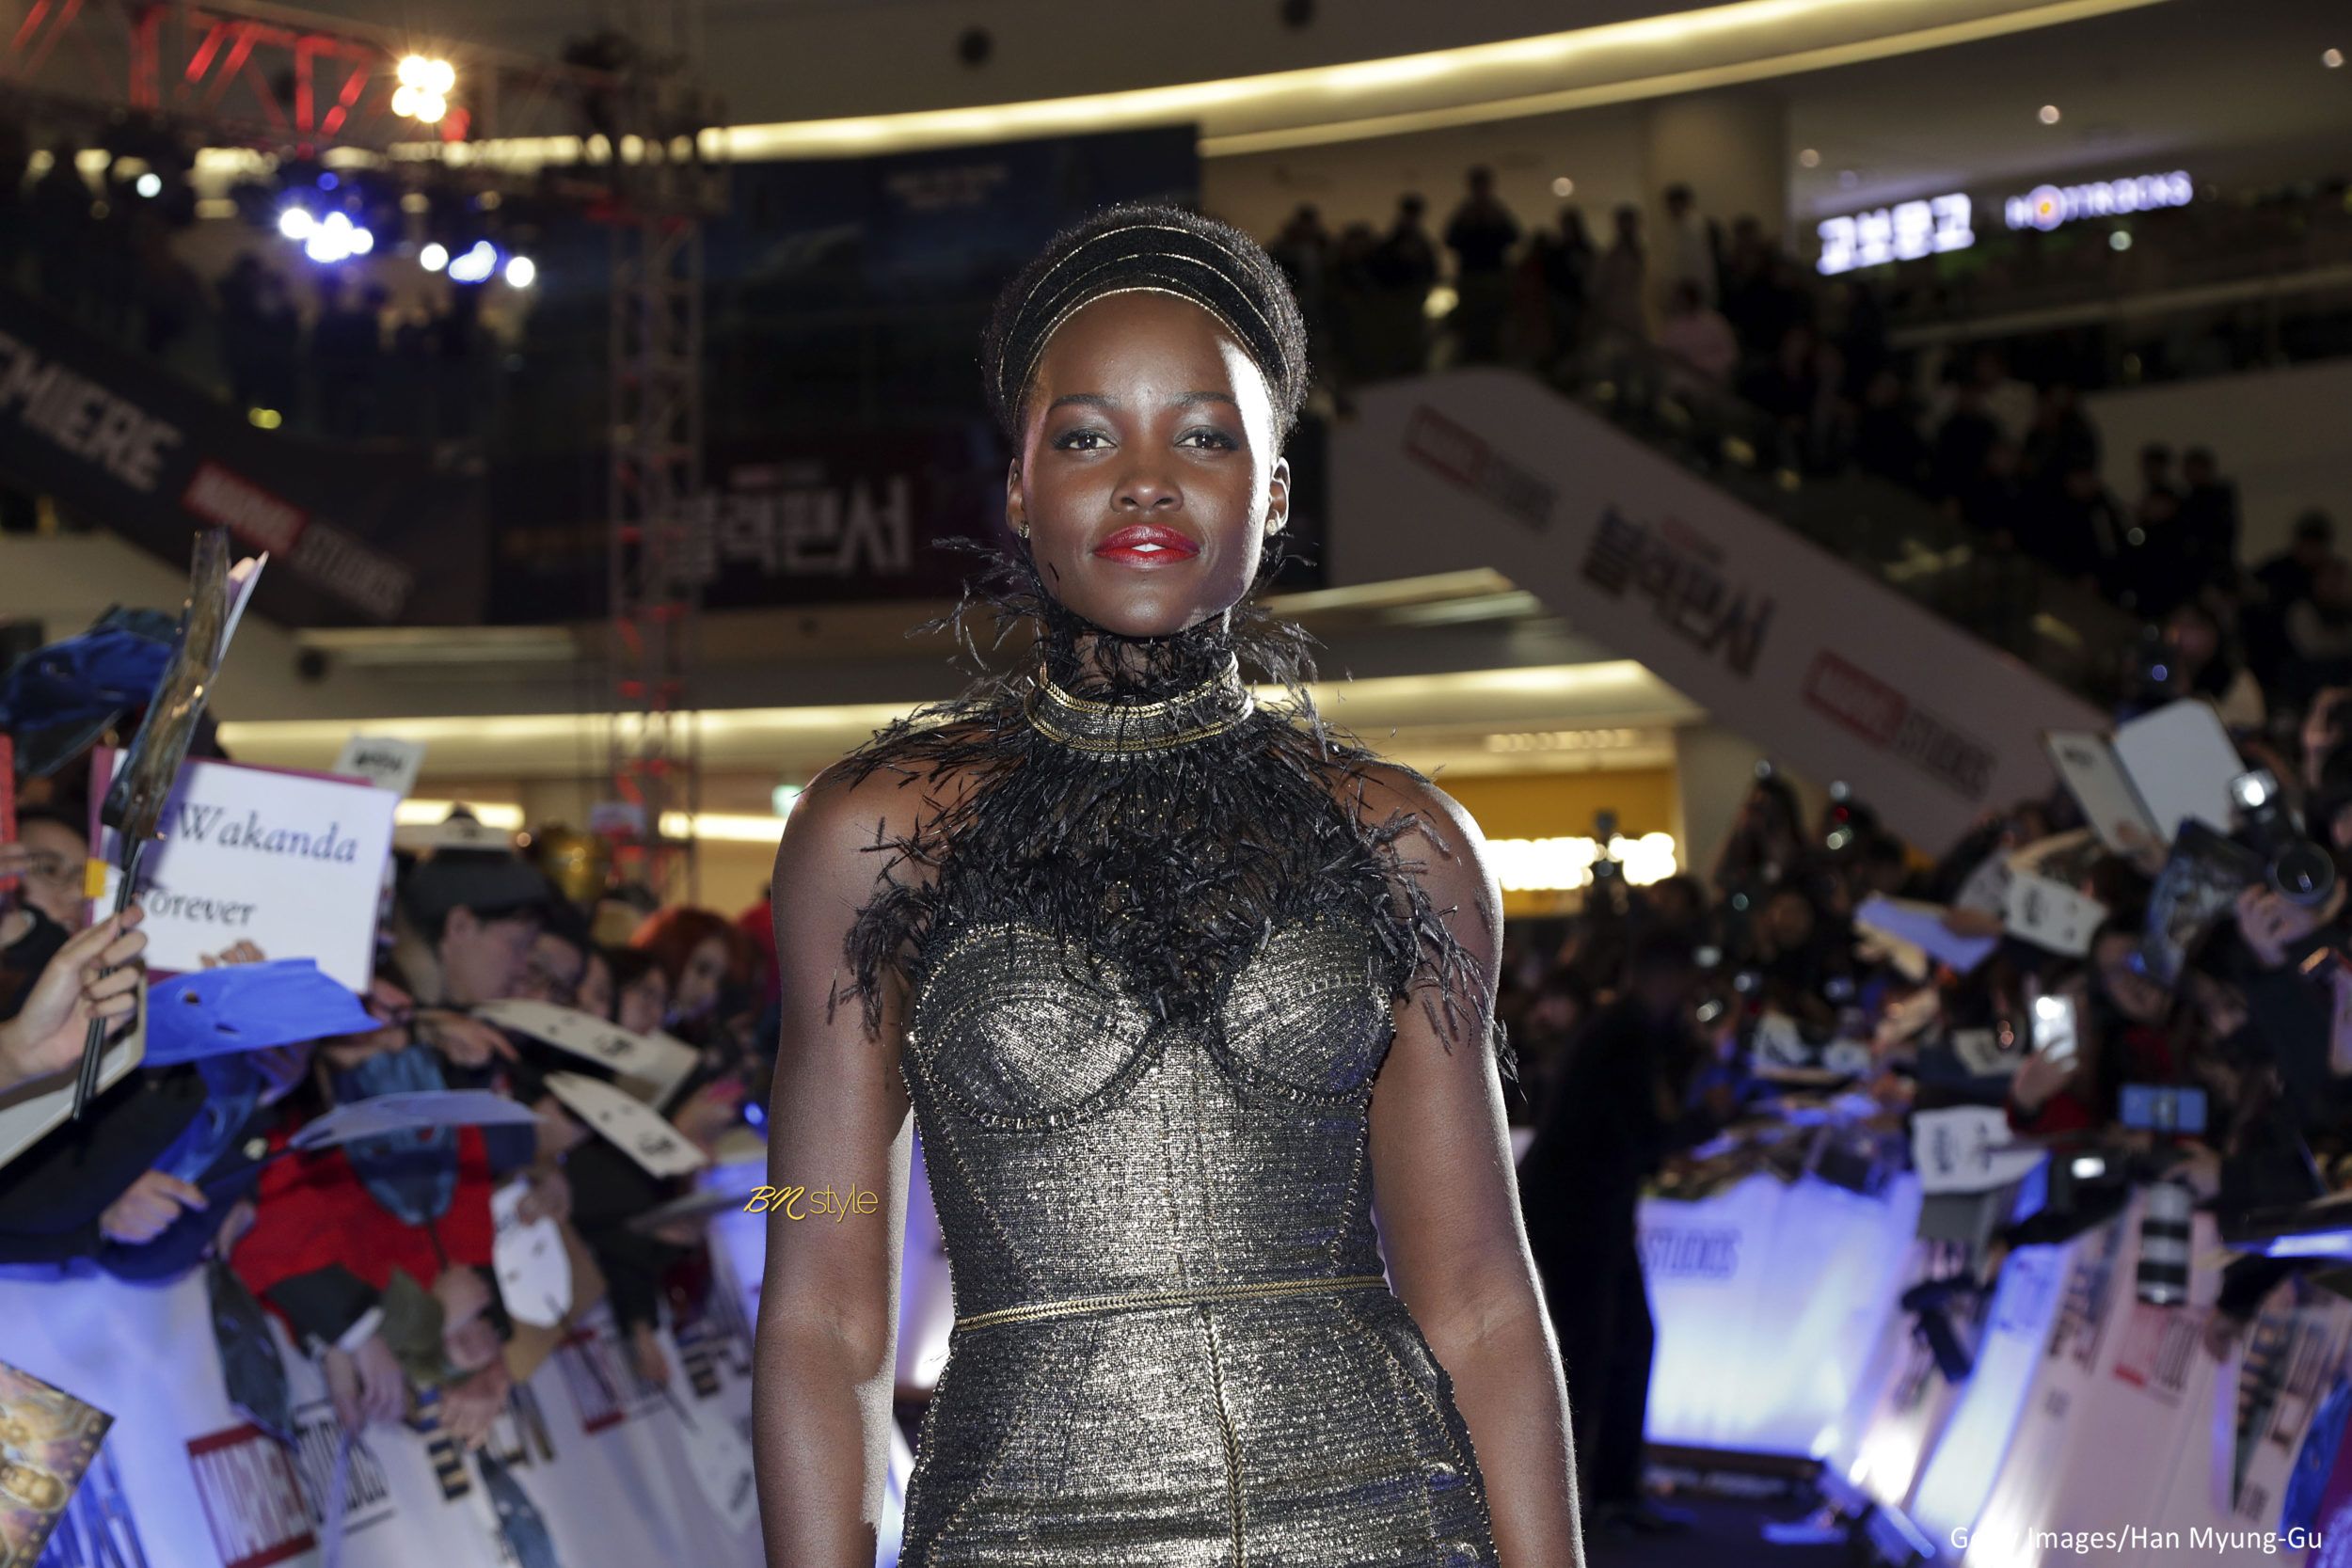 arrives at the red carpet of the Seoul premiere of 'Black Panther' on February 5, 2018 in Seoul, South Korea.